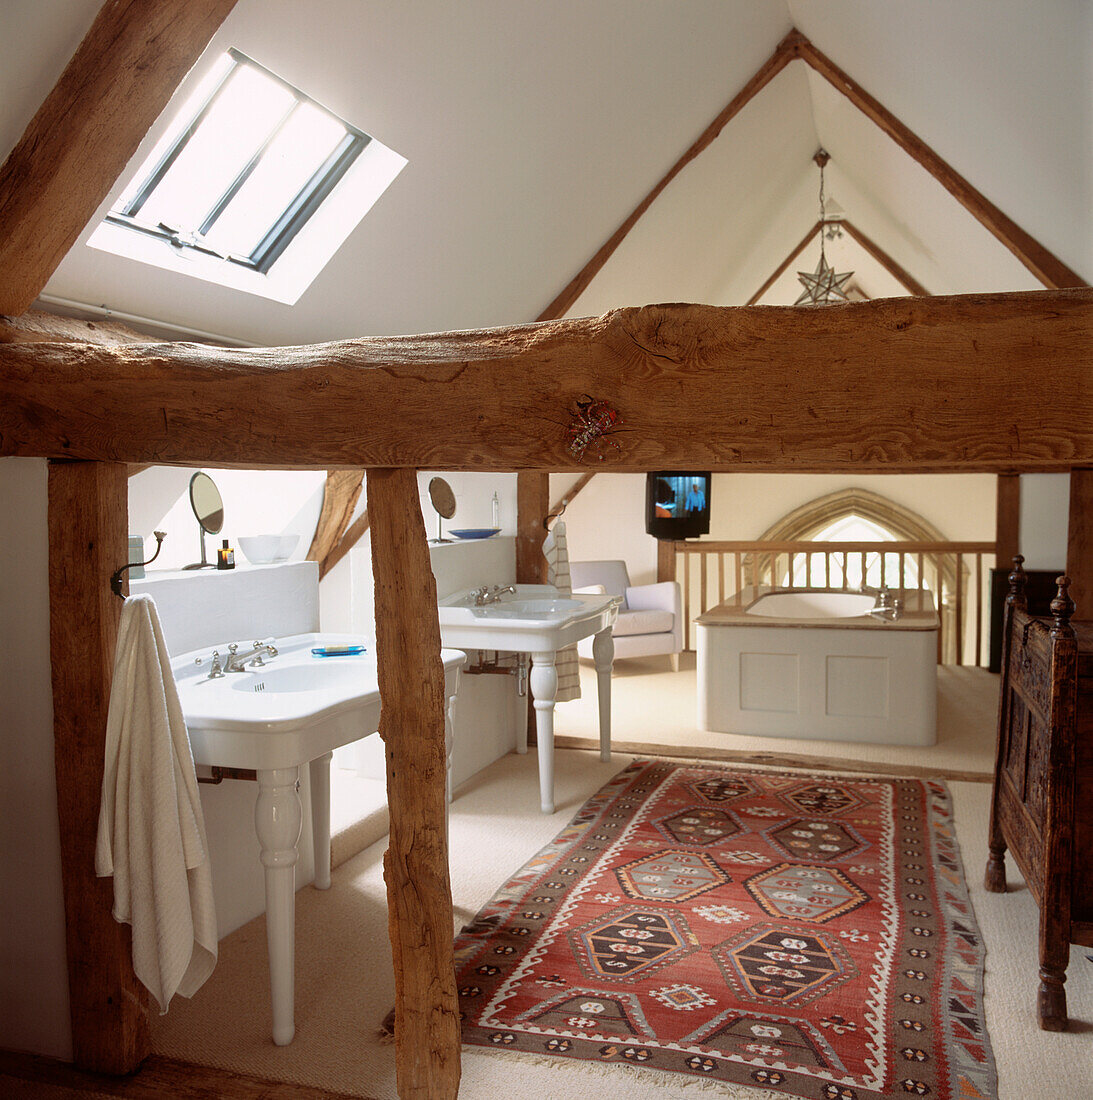 Attic bathroom with low level oak beams and apex roof